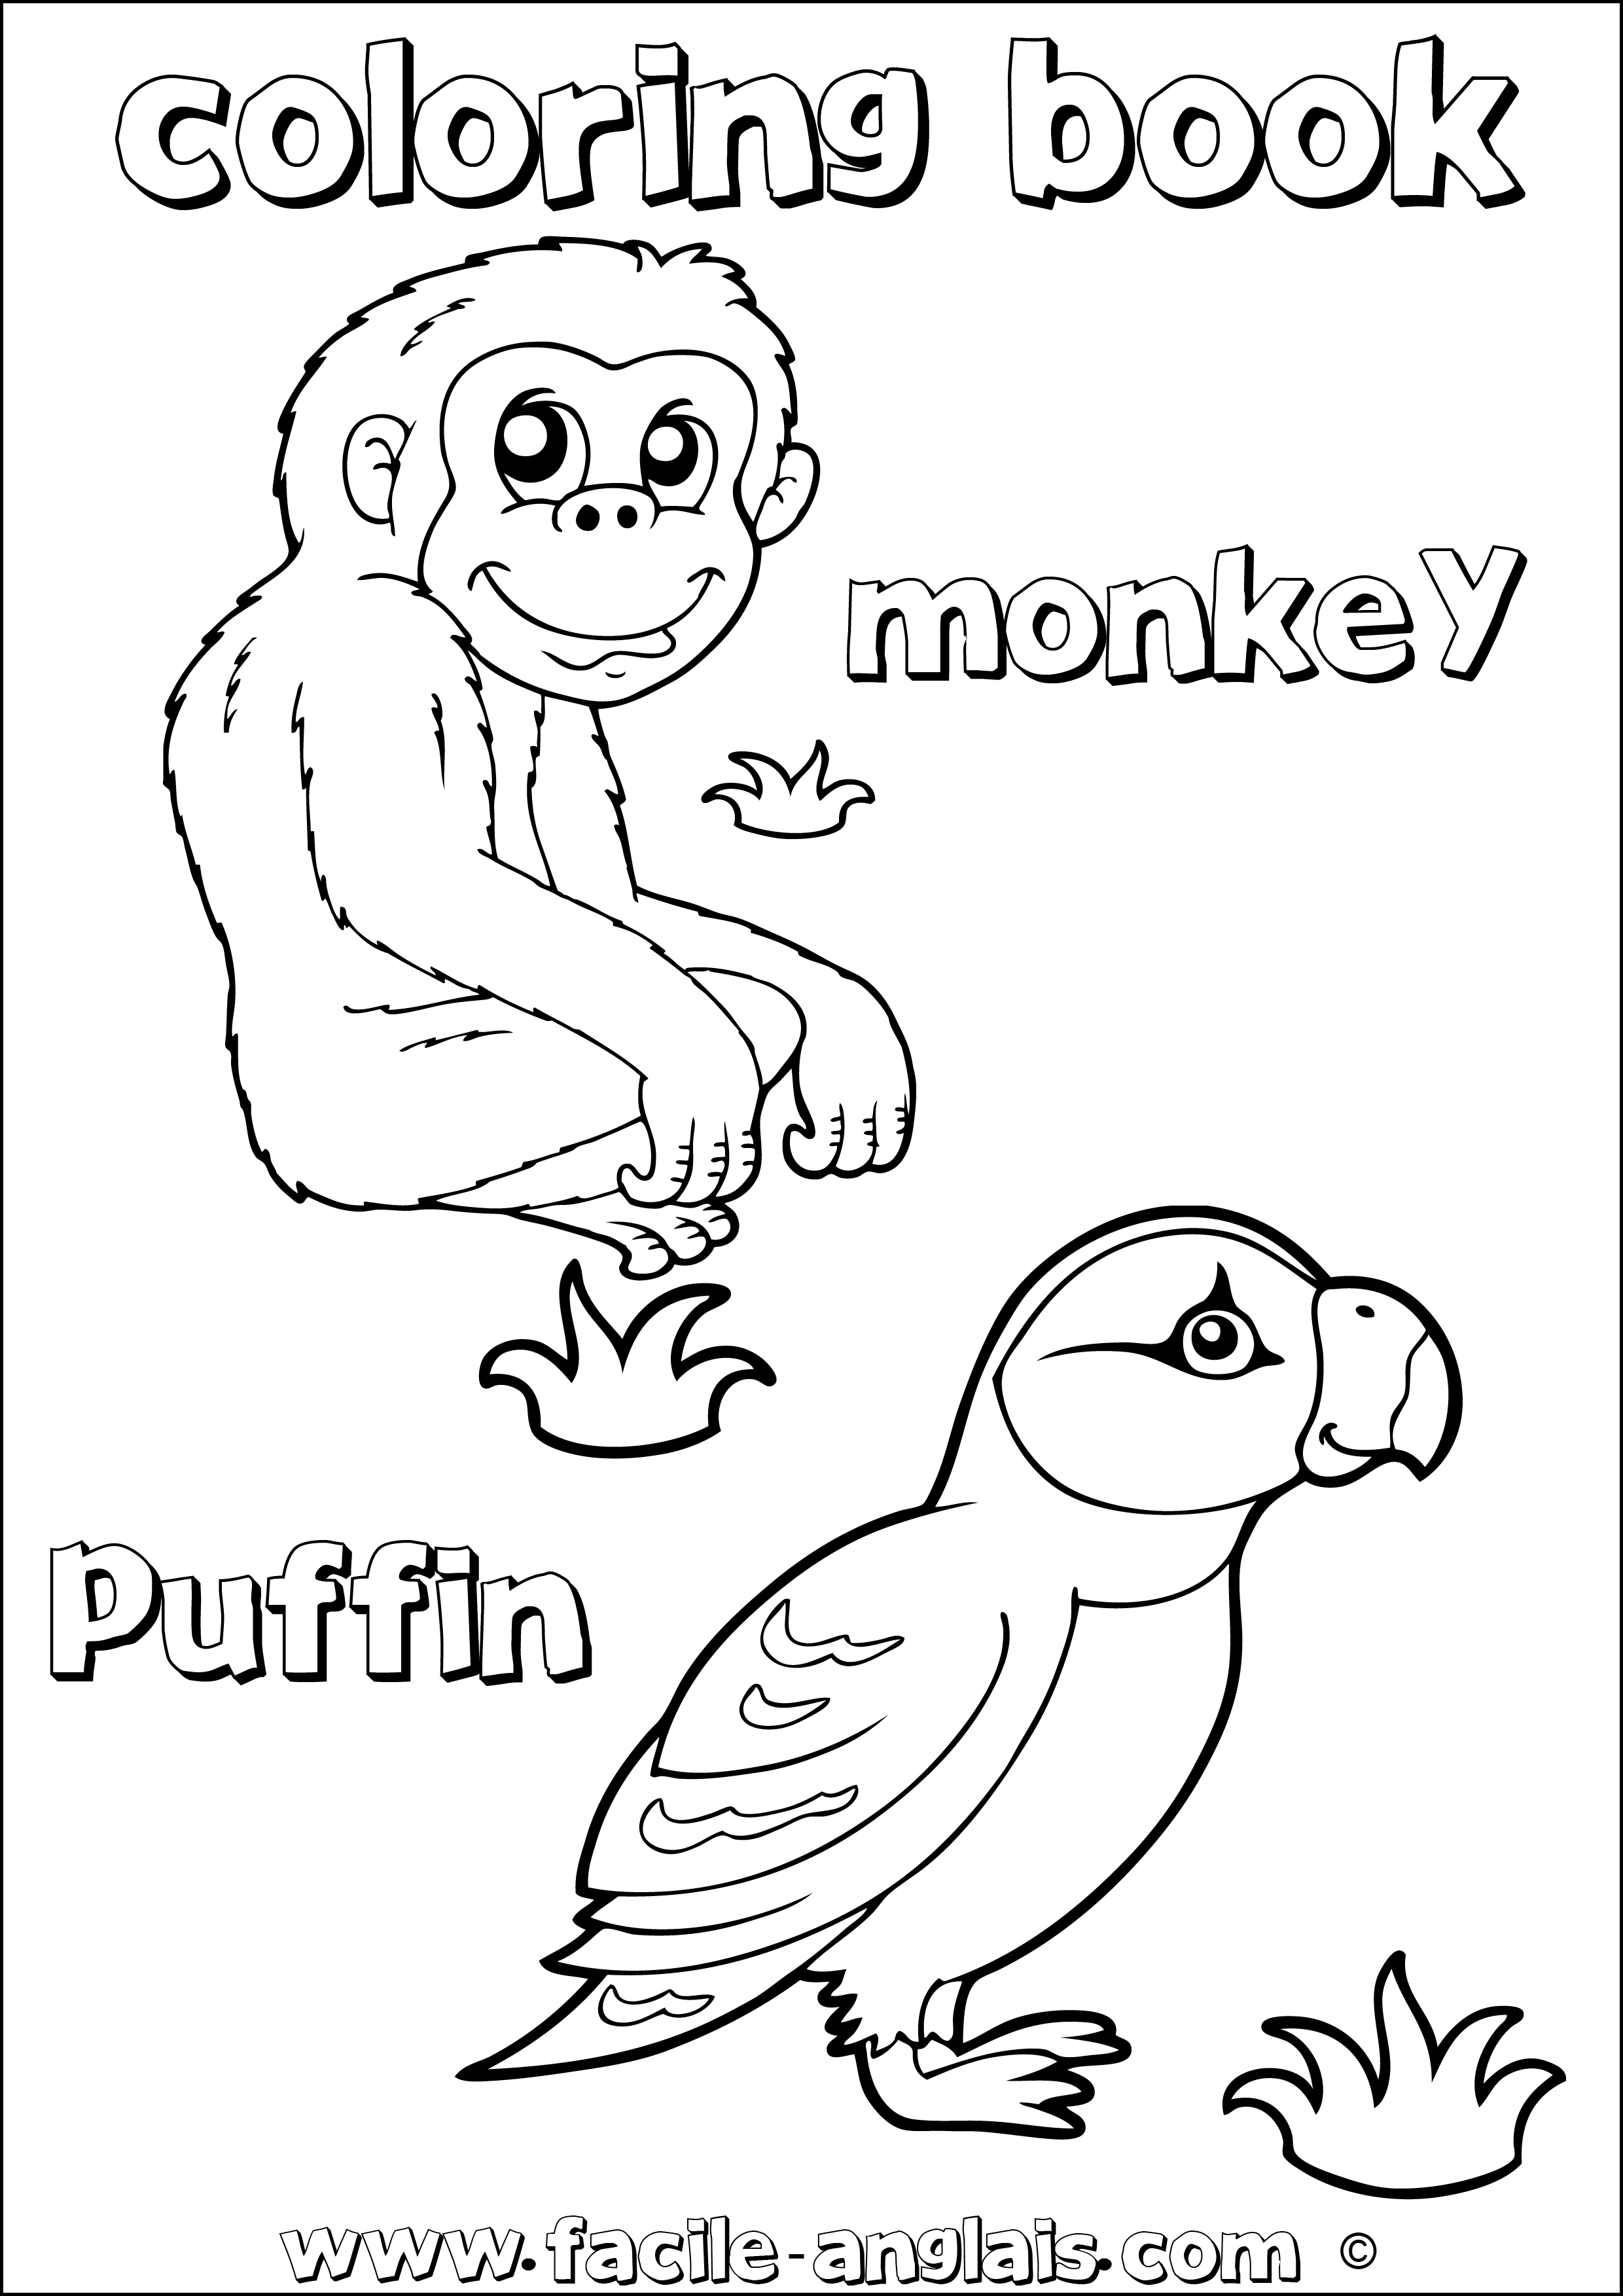 coloring book monkey macareux puffin